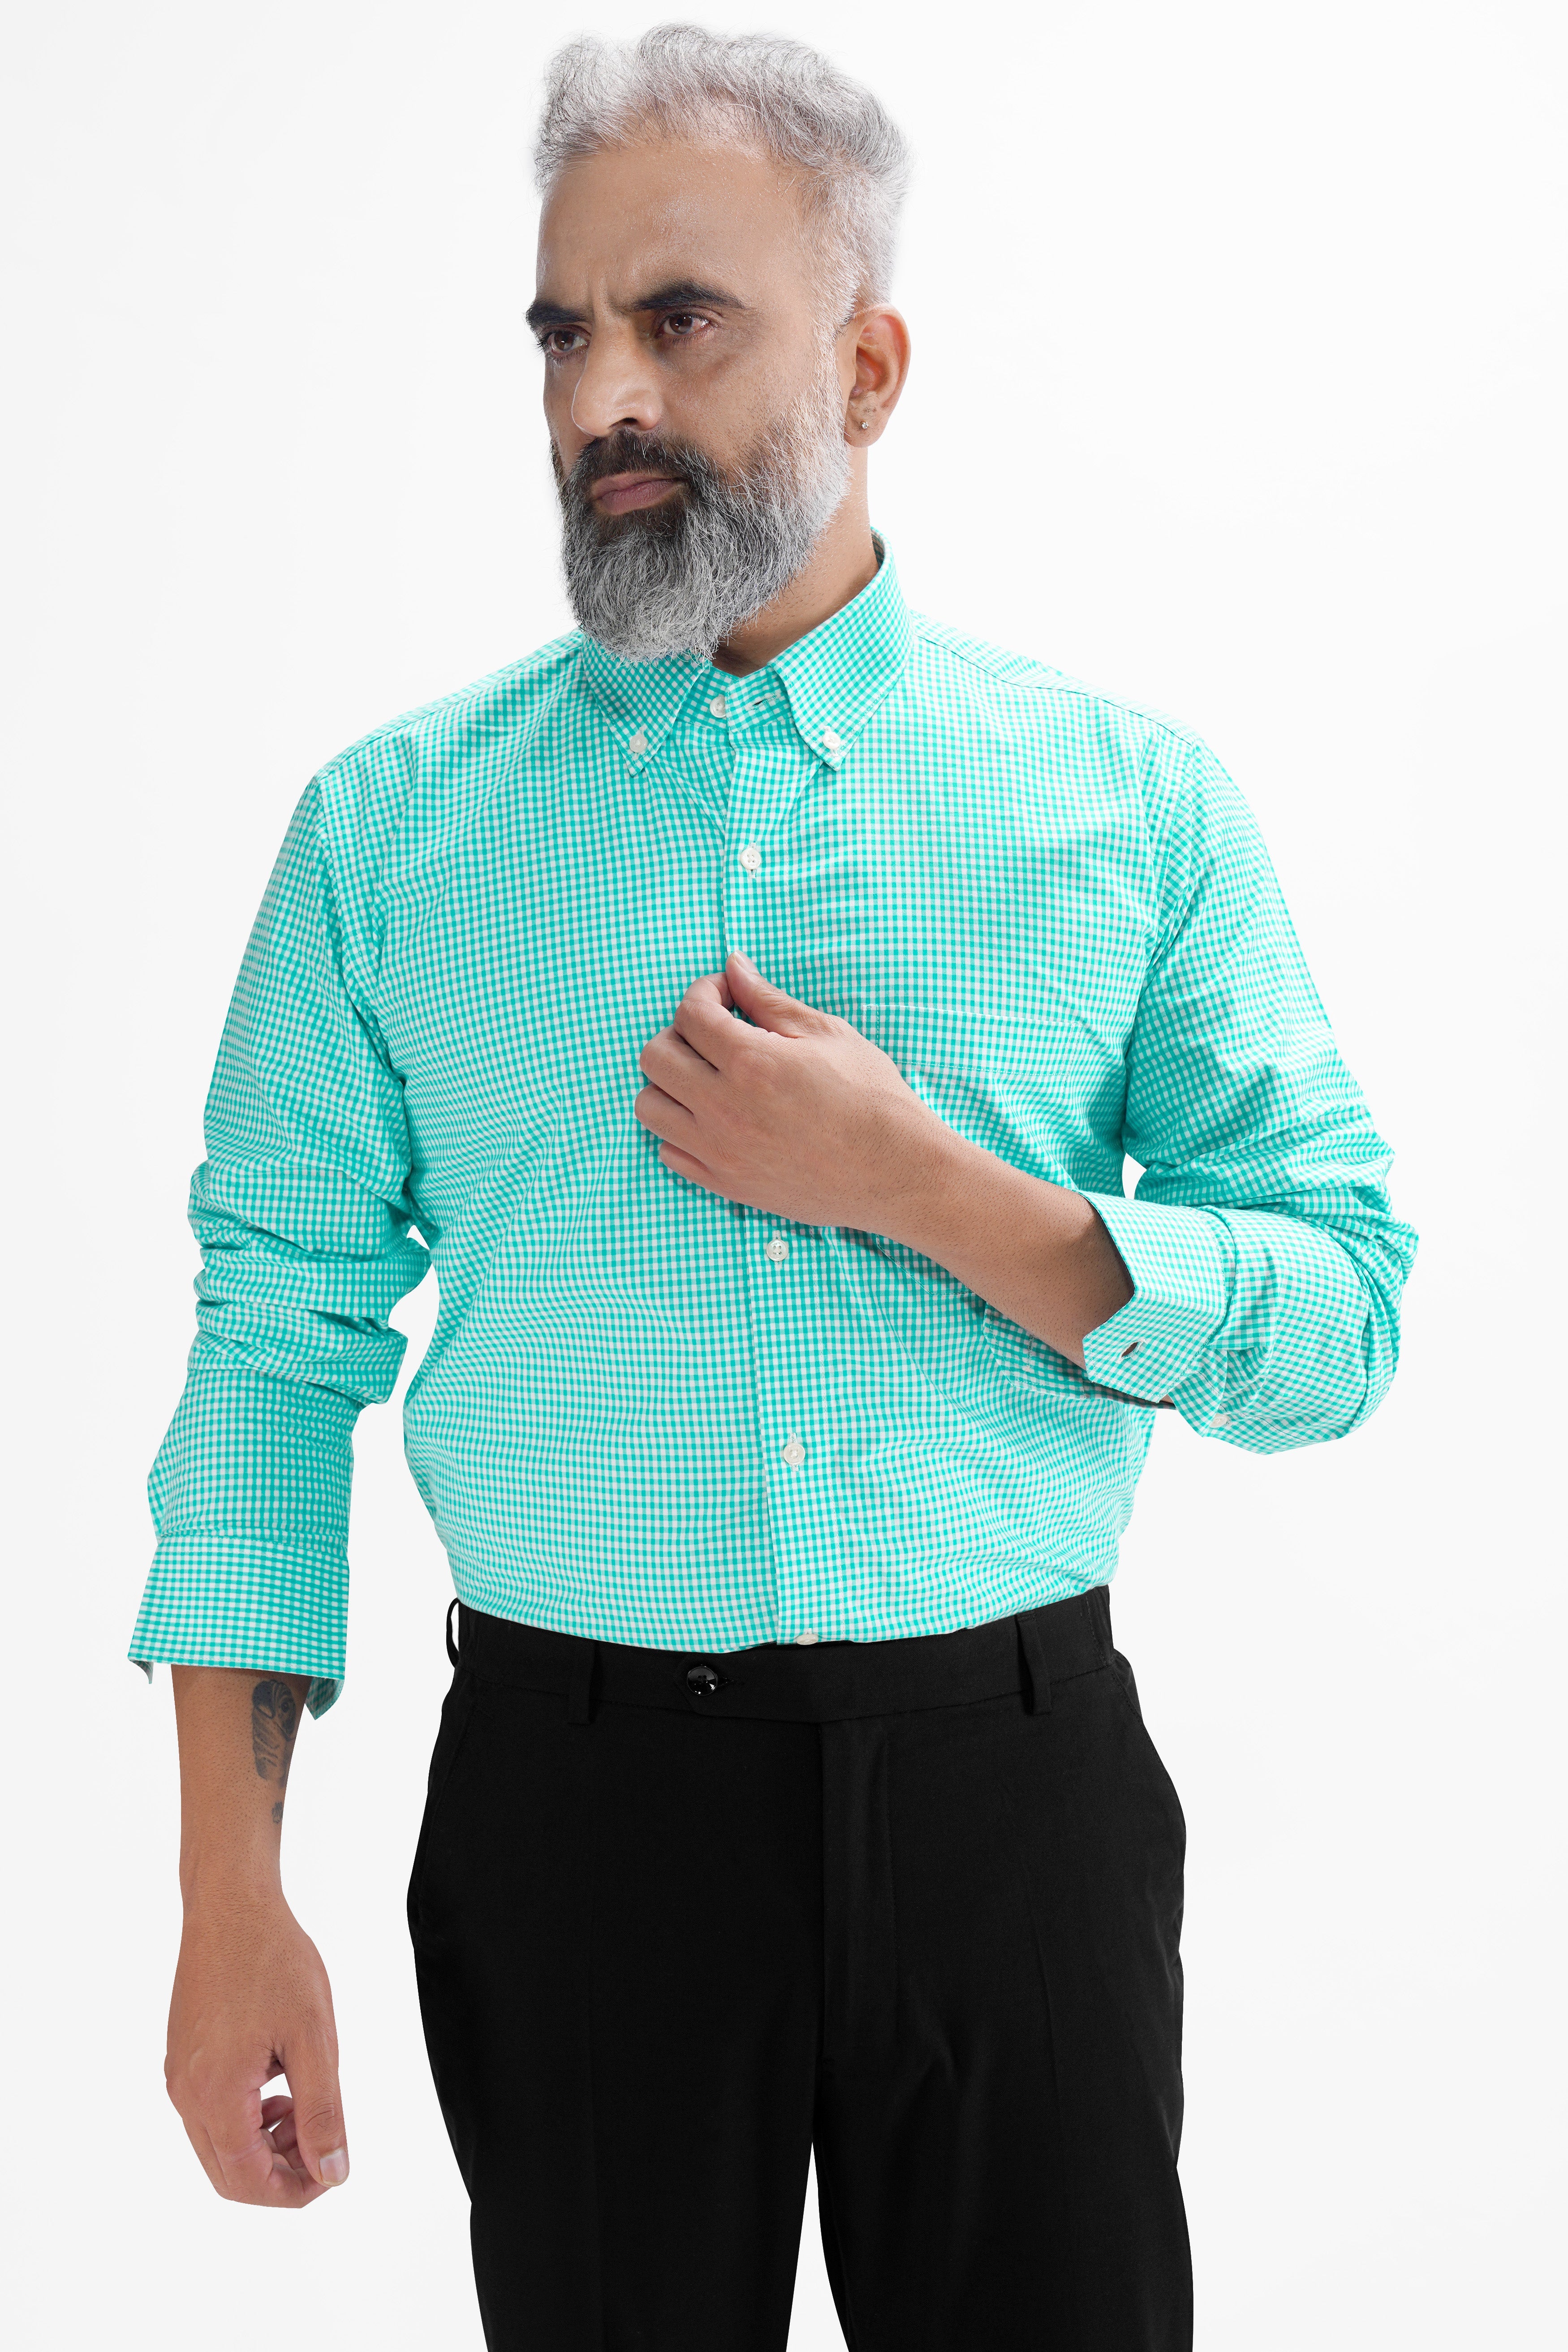 Turquoise Green with Bright White Gingham Checkered Premium Cotton Button Down Shirt